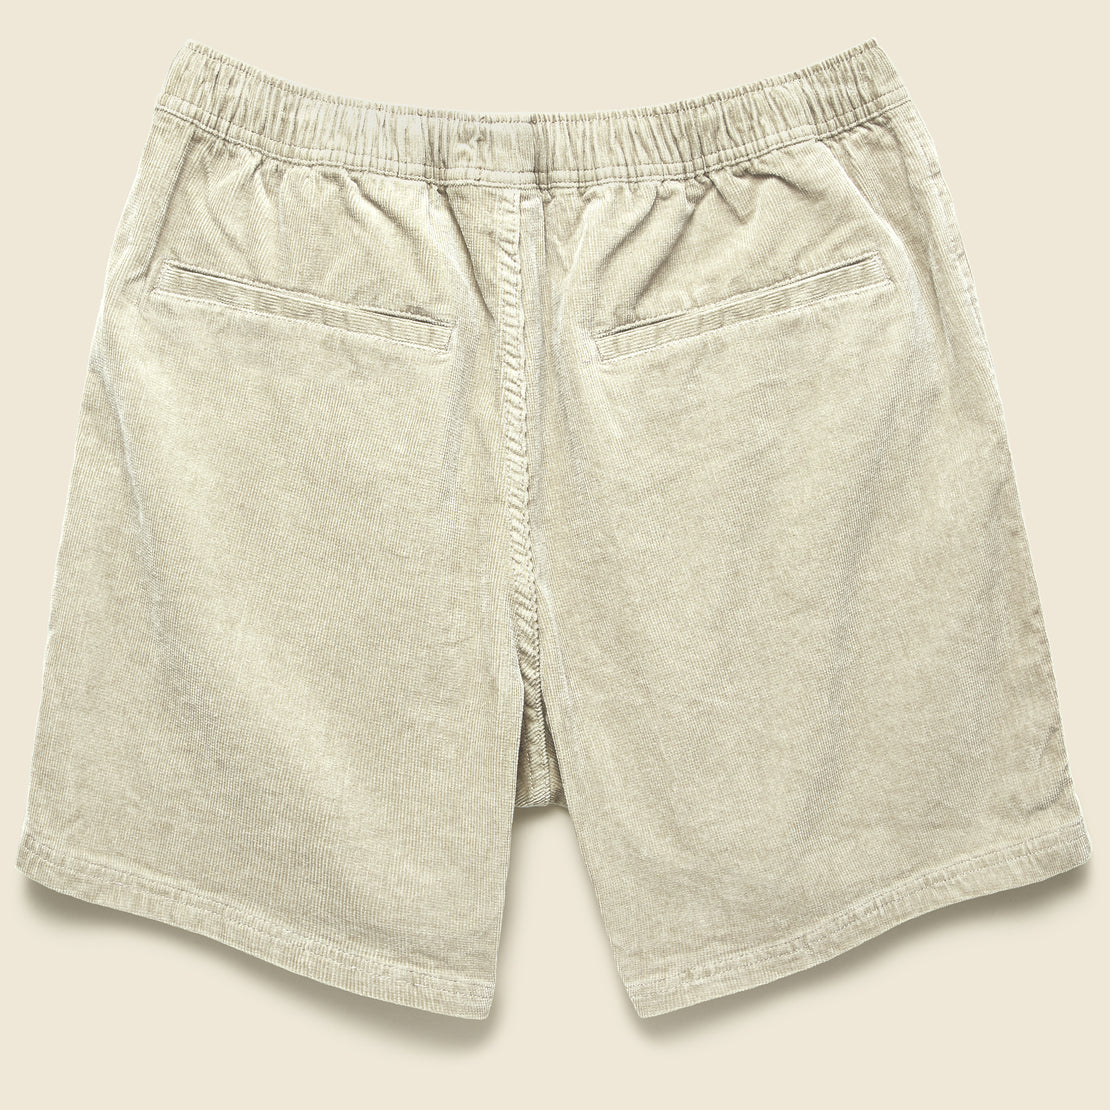 Cord Local Short - Silver Birch - Katin - STAG Provisions - Shorts - Lounge